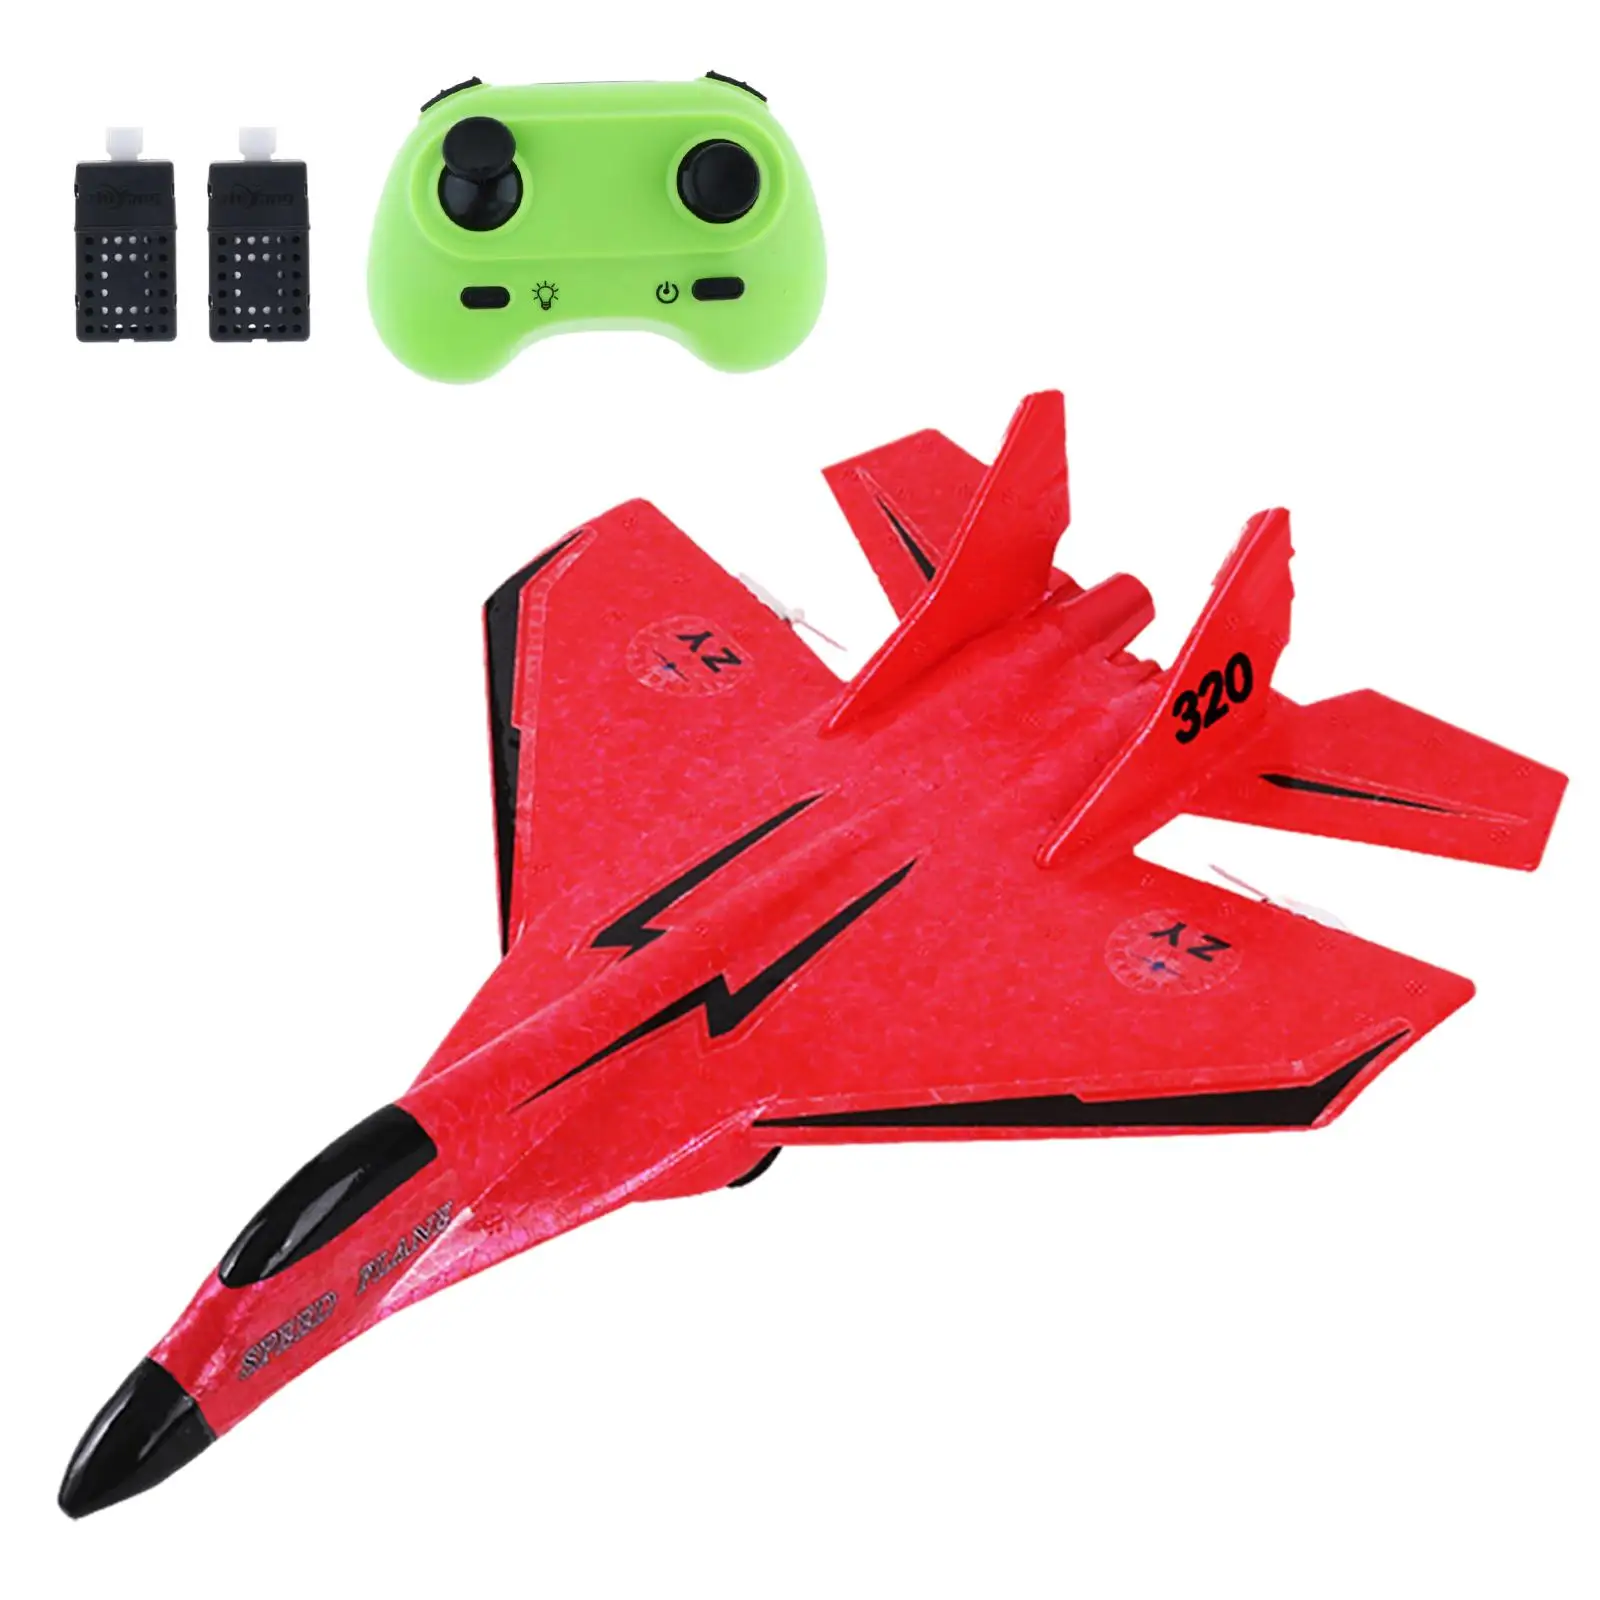 2 CH RC Plane Portable Ready to Easy to Control with Light Gift Foam RC Airplane RC Glider Aircraft for Kids Boys Girls